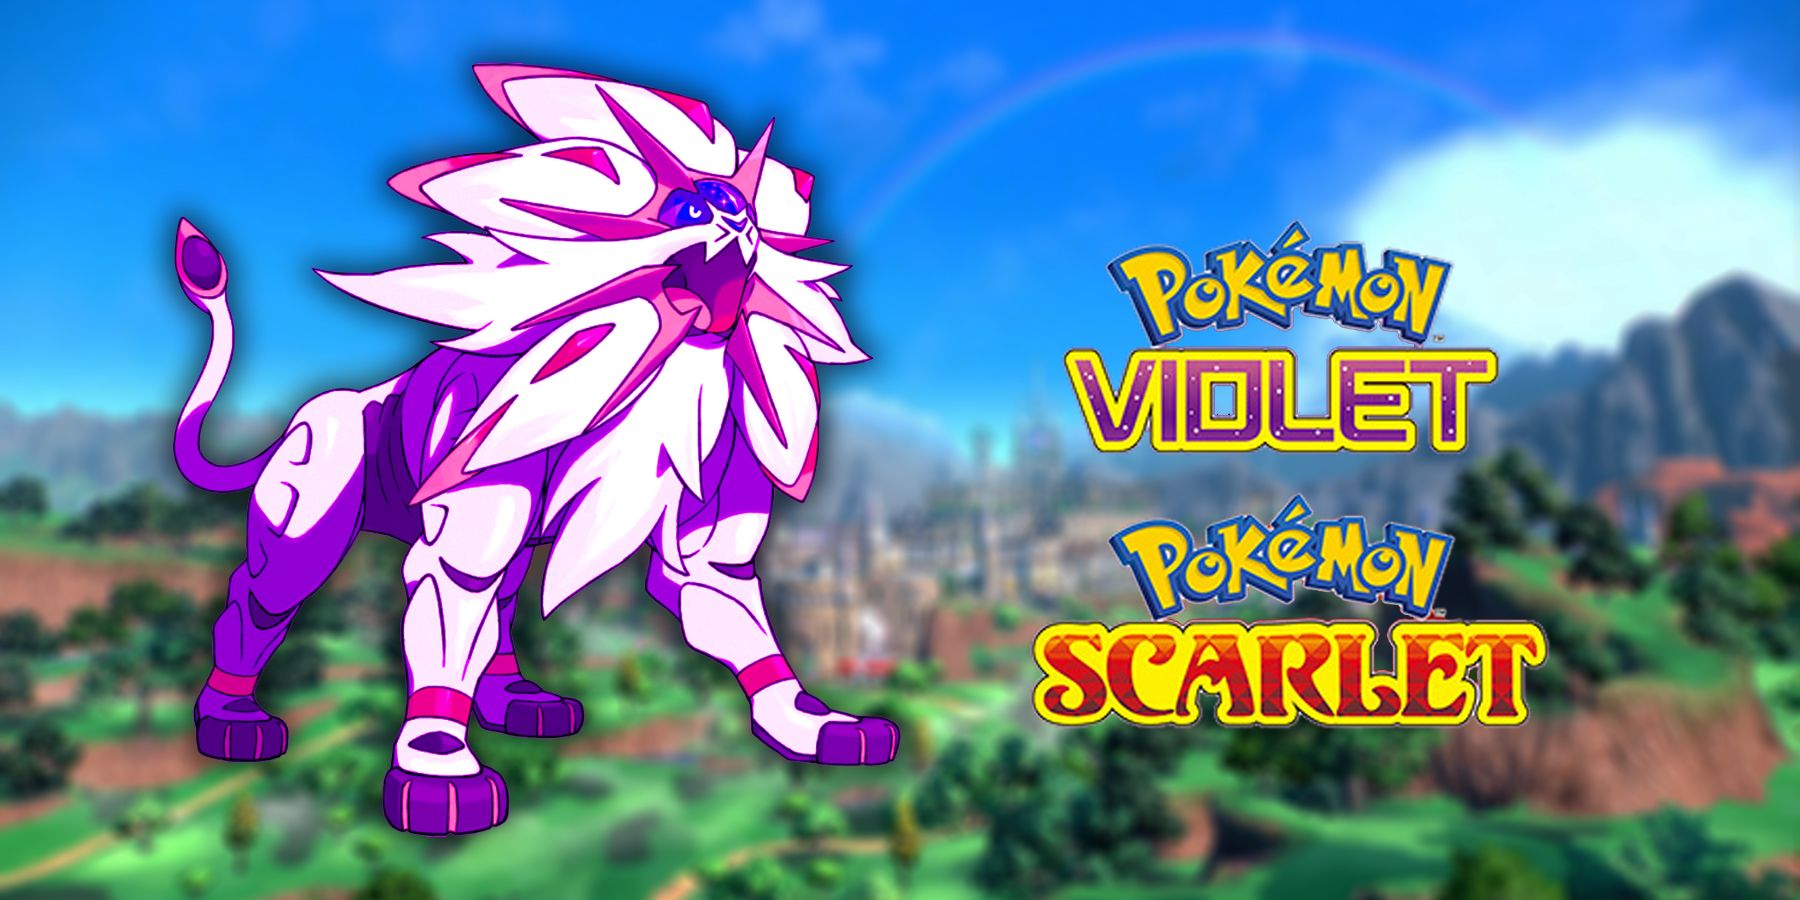 The Pokemon Scarlet and Violet text logos with a purple Solgaleo from Pokemon Sun and Moon.